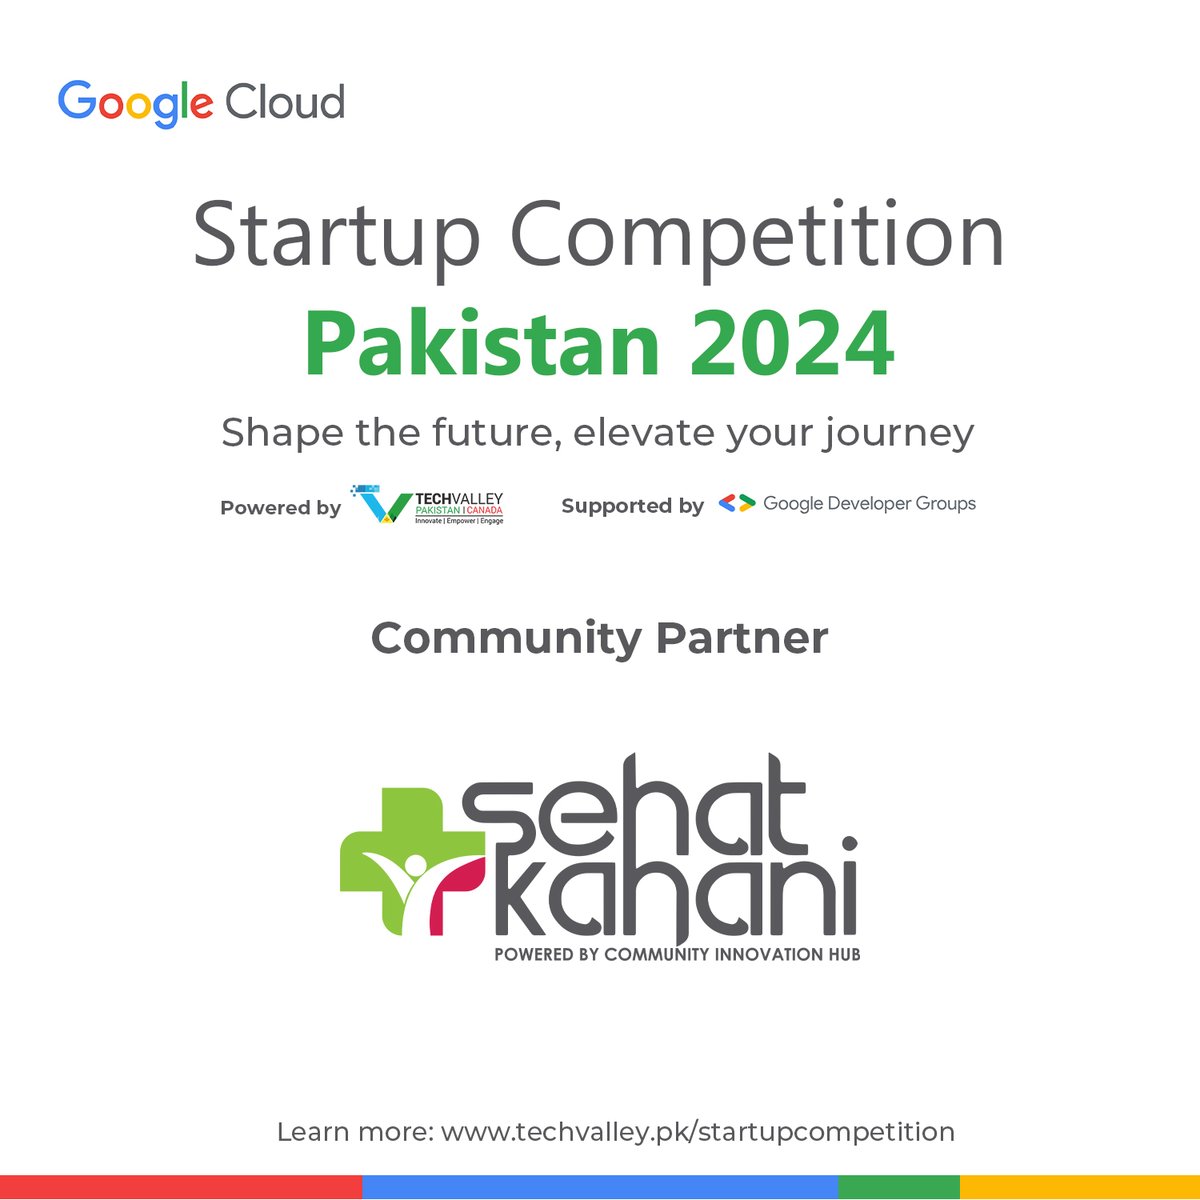 Exciting news! Sehat Kahani is now the official Community Partner for Google Cloud Startup Competition Pakistan 2024! Callingall Pakistani startups in AI, e-commerce, fintech, digital tech, sustainability, and more. Apply now at techvalley.pk/startupcompeti… @TechValleyPak @googlecloud